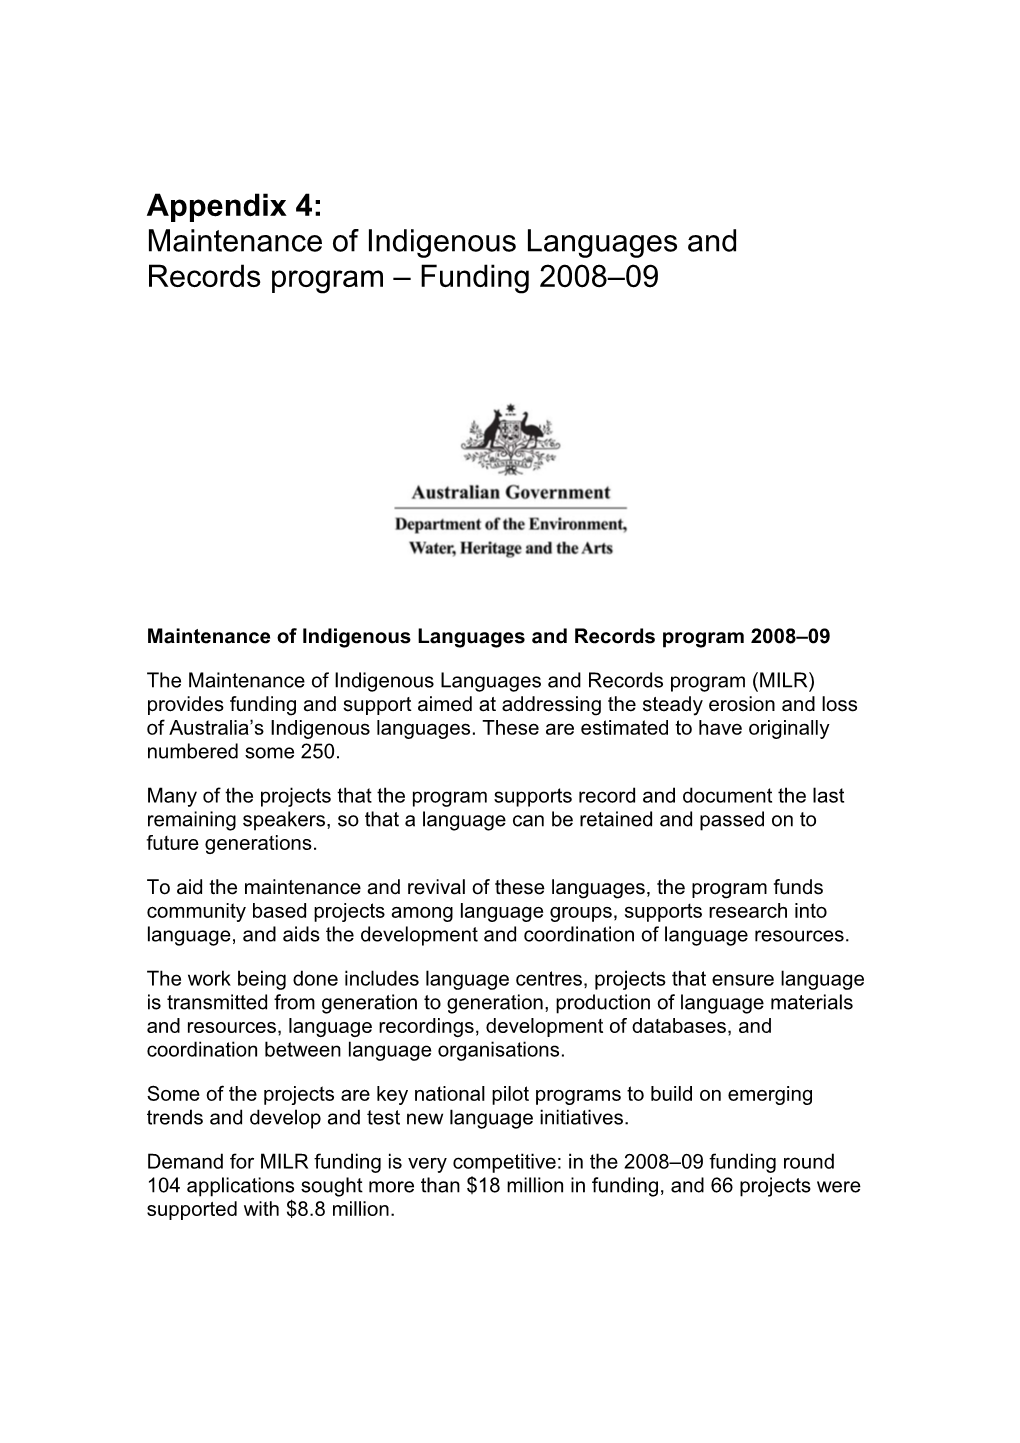 Maintenance of Indigenous Languages and Records Program 2008 09